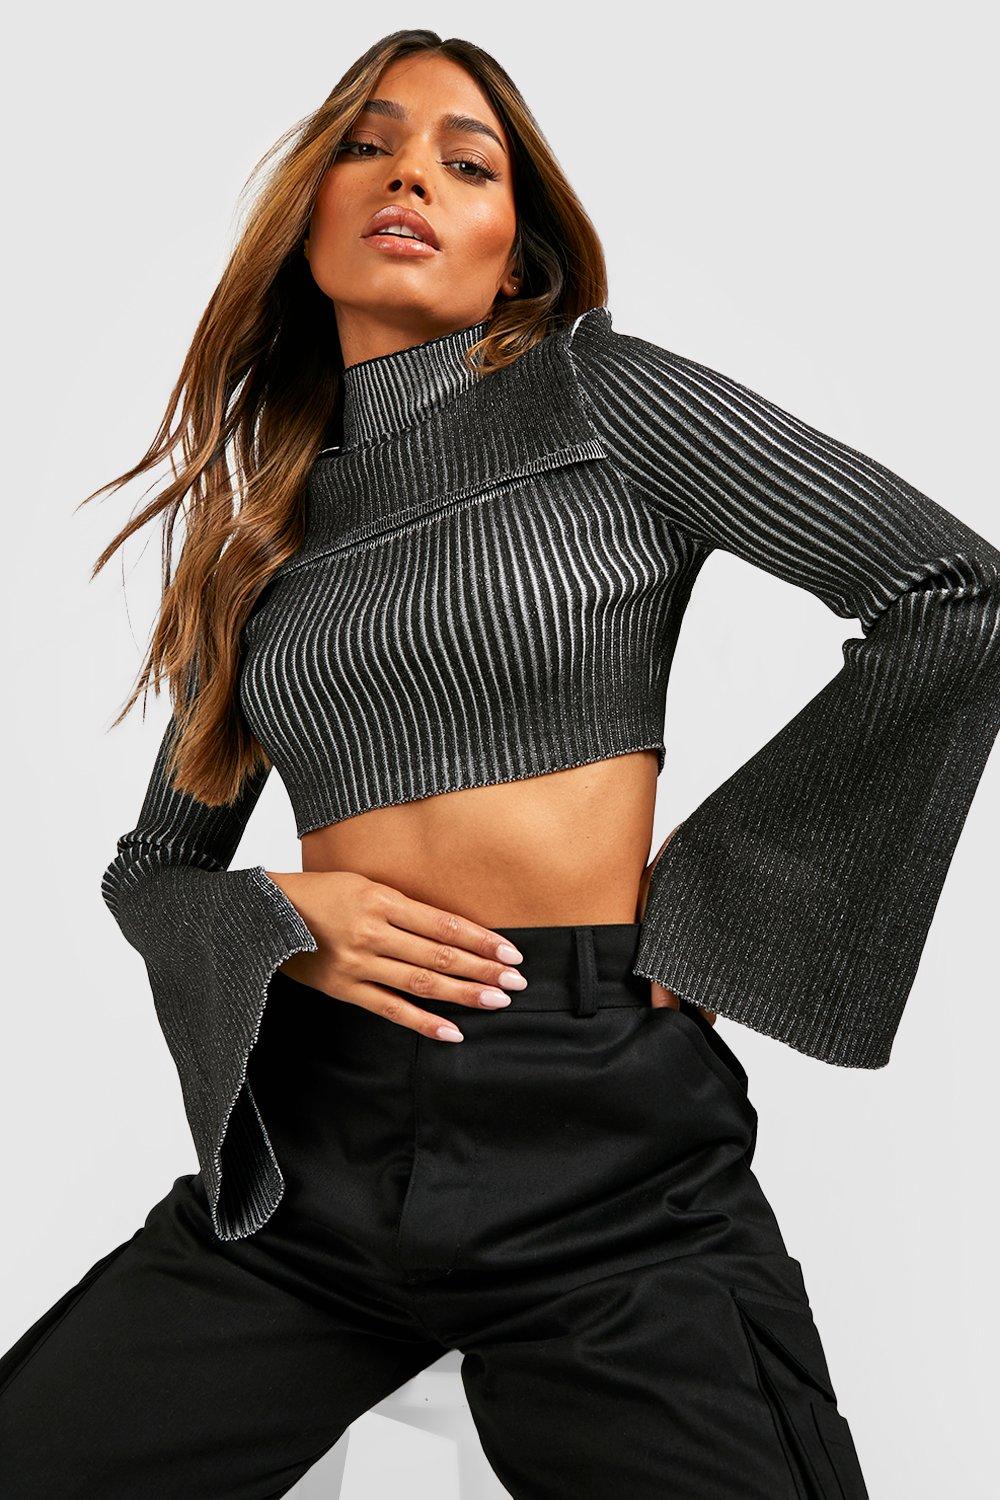 Black Slinky High Neck Side Cut Out Top Pretty Little Thing Women Clothing Tops High Necks 